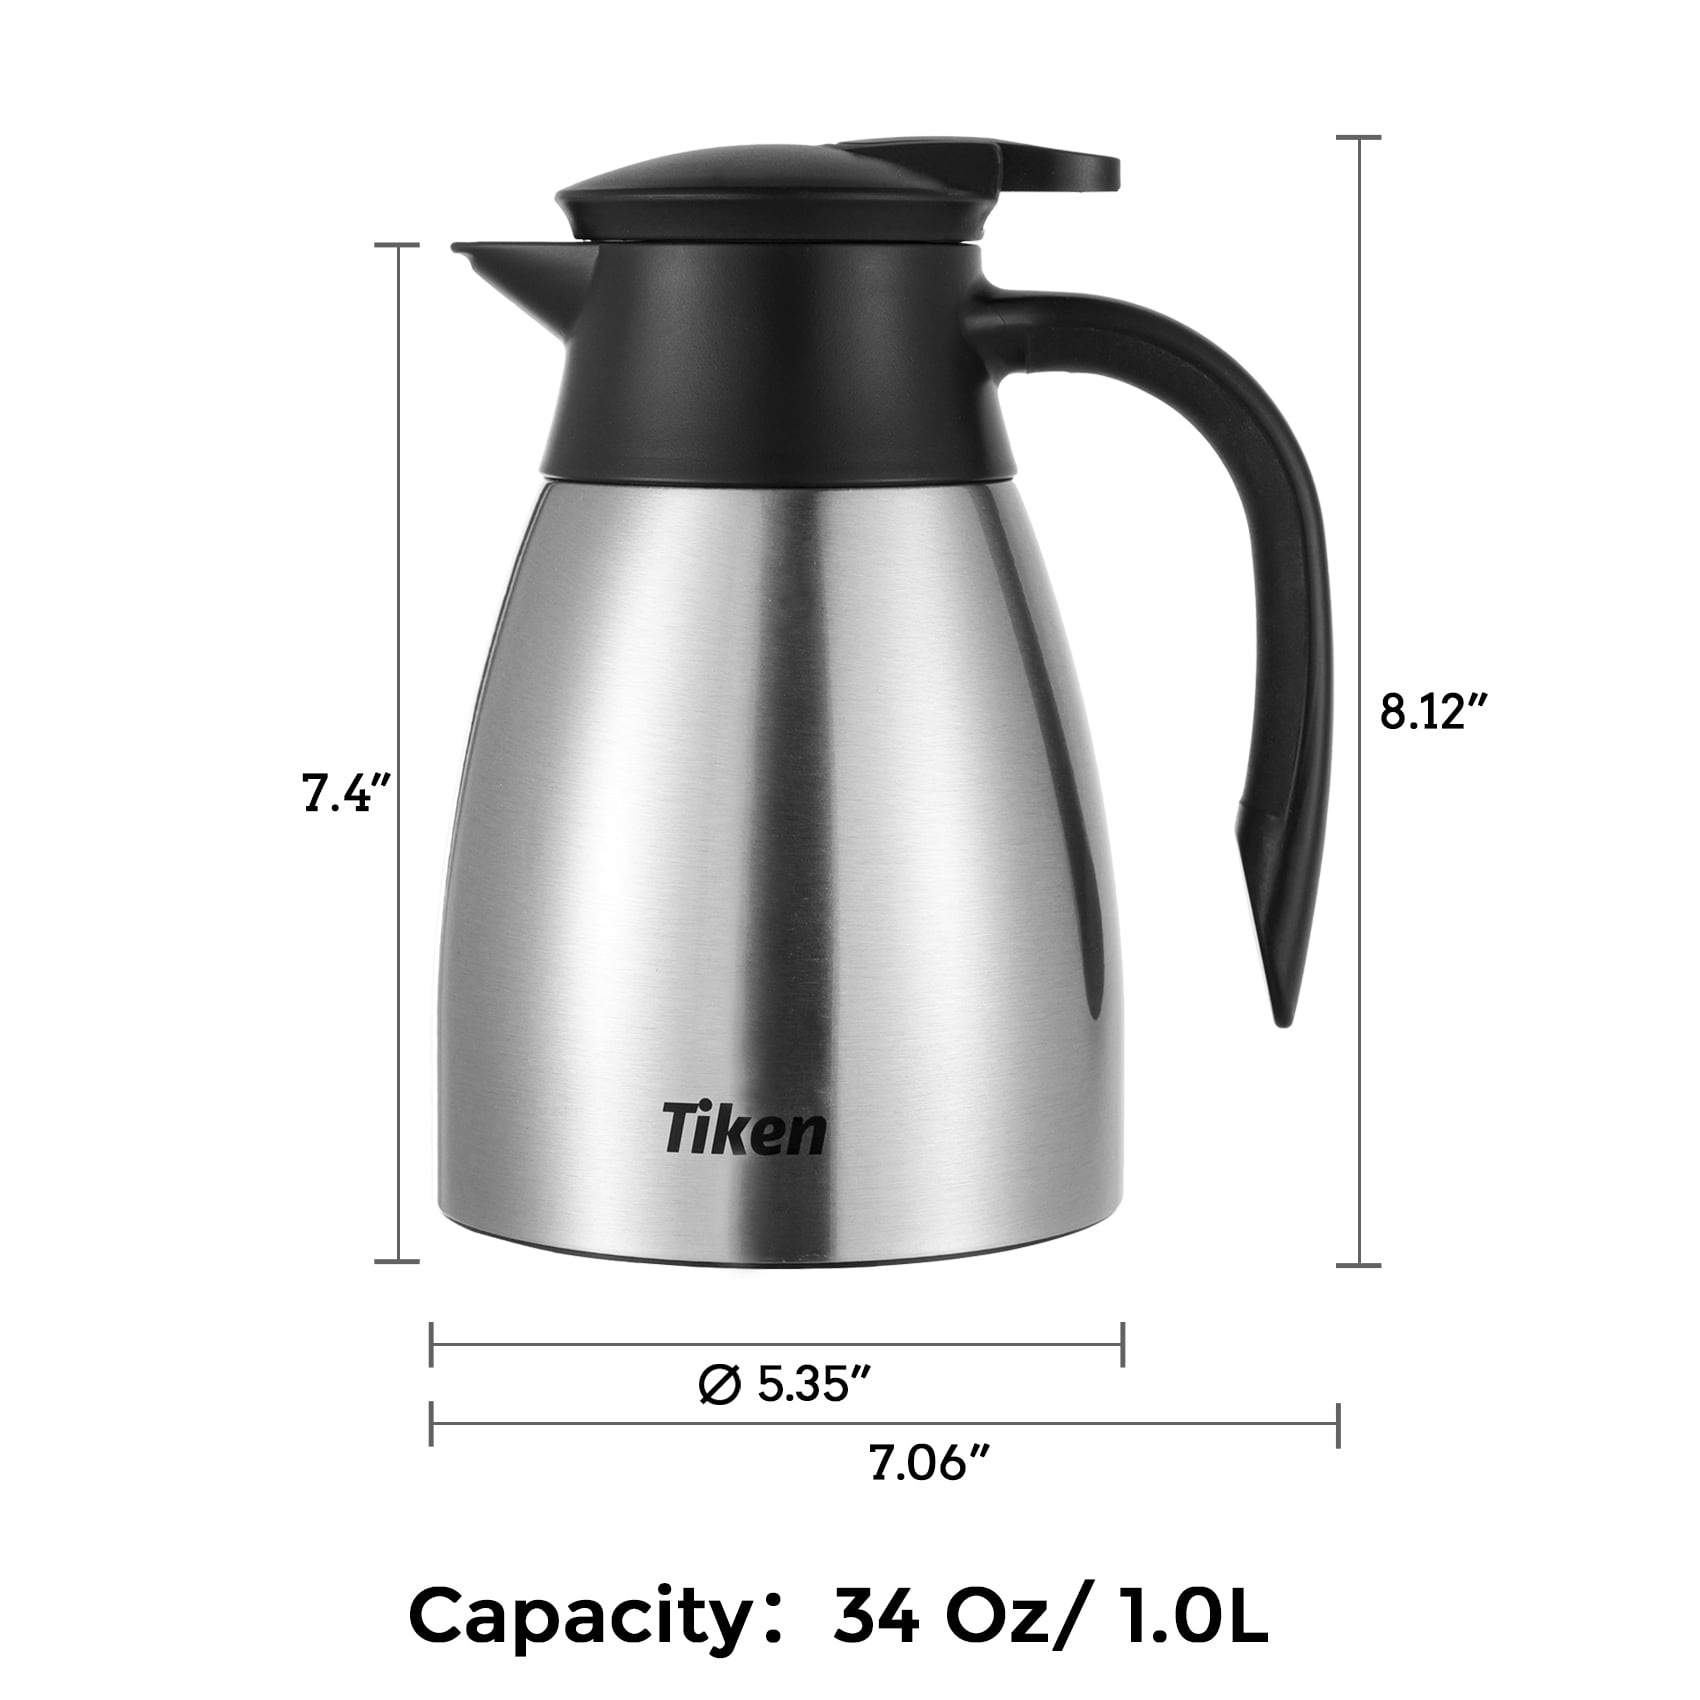 Generic iSH09-M494257mn Olerd 34 Oz Thermal Coffee Carafe, Stainless Steel  Insulated Vacuum Coffee Carafes For Keeping Hot, 1 Liter Tea, Water, and Cof